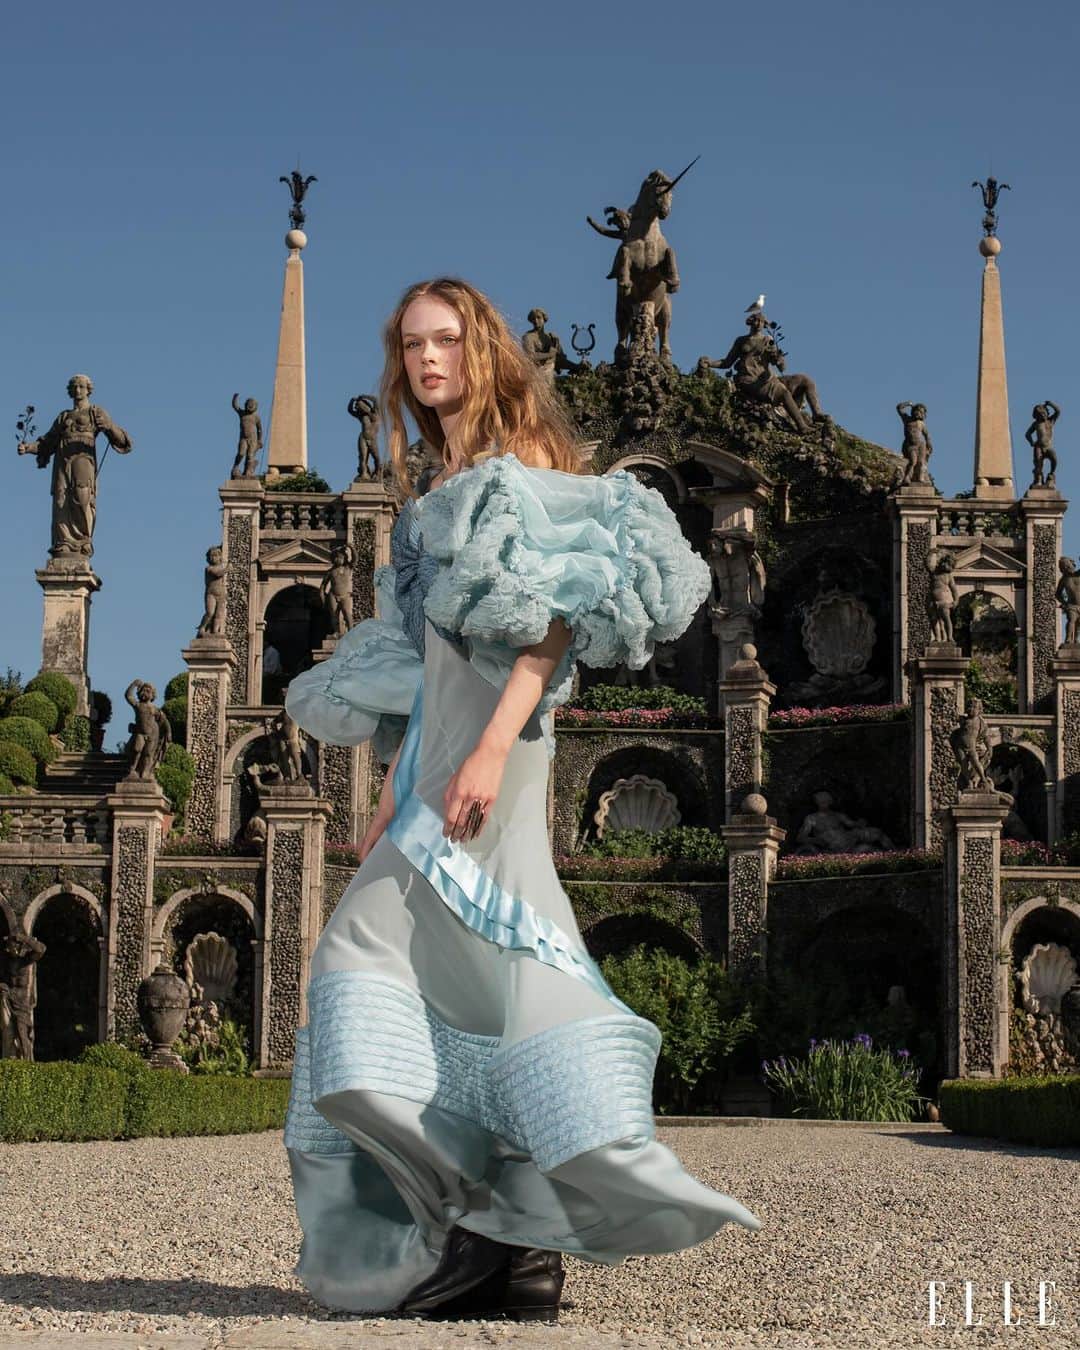 ELLE Magazineのインスタグラム：「The gardens of Isola Bella, the Italian island that played host to @louisvuitton’s cruise 2024 show, were the perfect setting for the house’s fanciful creations inspired by mythical aquatic creatures.  ELLE: @elleusa Editor-in-chief: Nina Garcia @ninagarcia Photographer: César Segarra @cesarsegarra_ Stylist: Anastasia Barbieri Hair: Fabio Petri at Streeters @fabiopetri @streetersagency Makeup: Ilaria Bosco at Streeters @bhoila @streetersagency Manicure: Christina Conrad at Calliste Agency @conradchristina @callisteagency Models: Franziska Jetzek and Seng Khan at Women Management; Fleur Breijer at Supreme Management; Oudey at NEXT Management @FranziskaJetzek @SenggKhan @women_paris @Fleur_Breijer @suprememgmt @Oudey_Mdl @nextmodels Production: Michaël Lacomblez at Louis2 @michael_louis2 @louis2.paris」